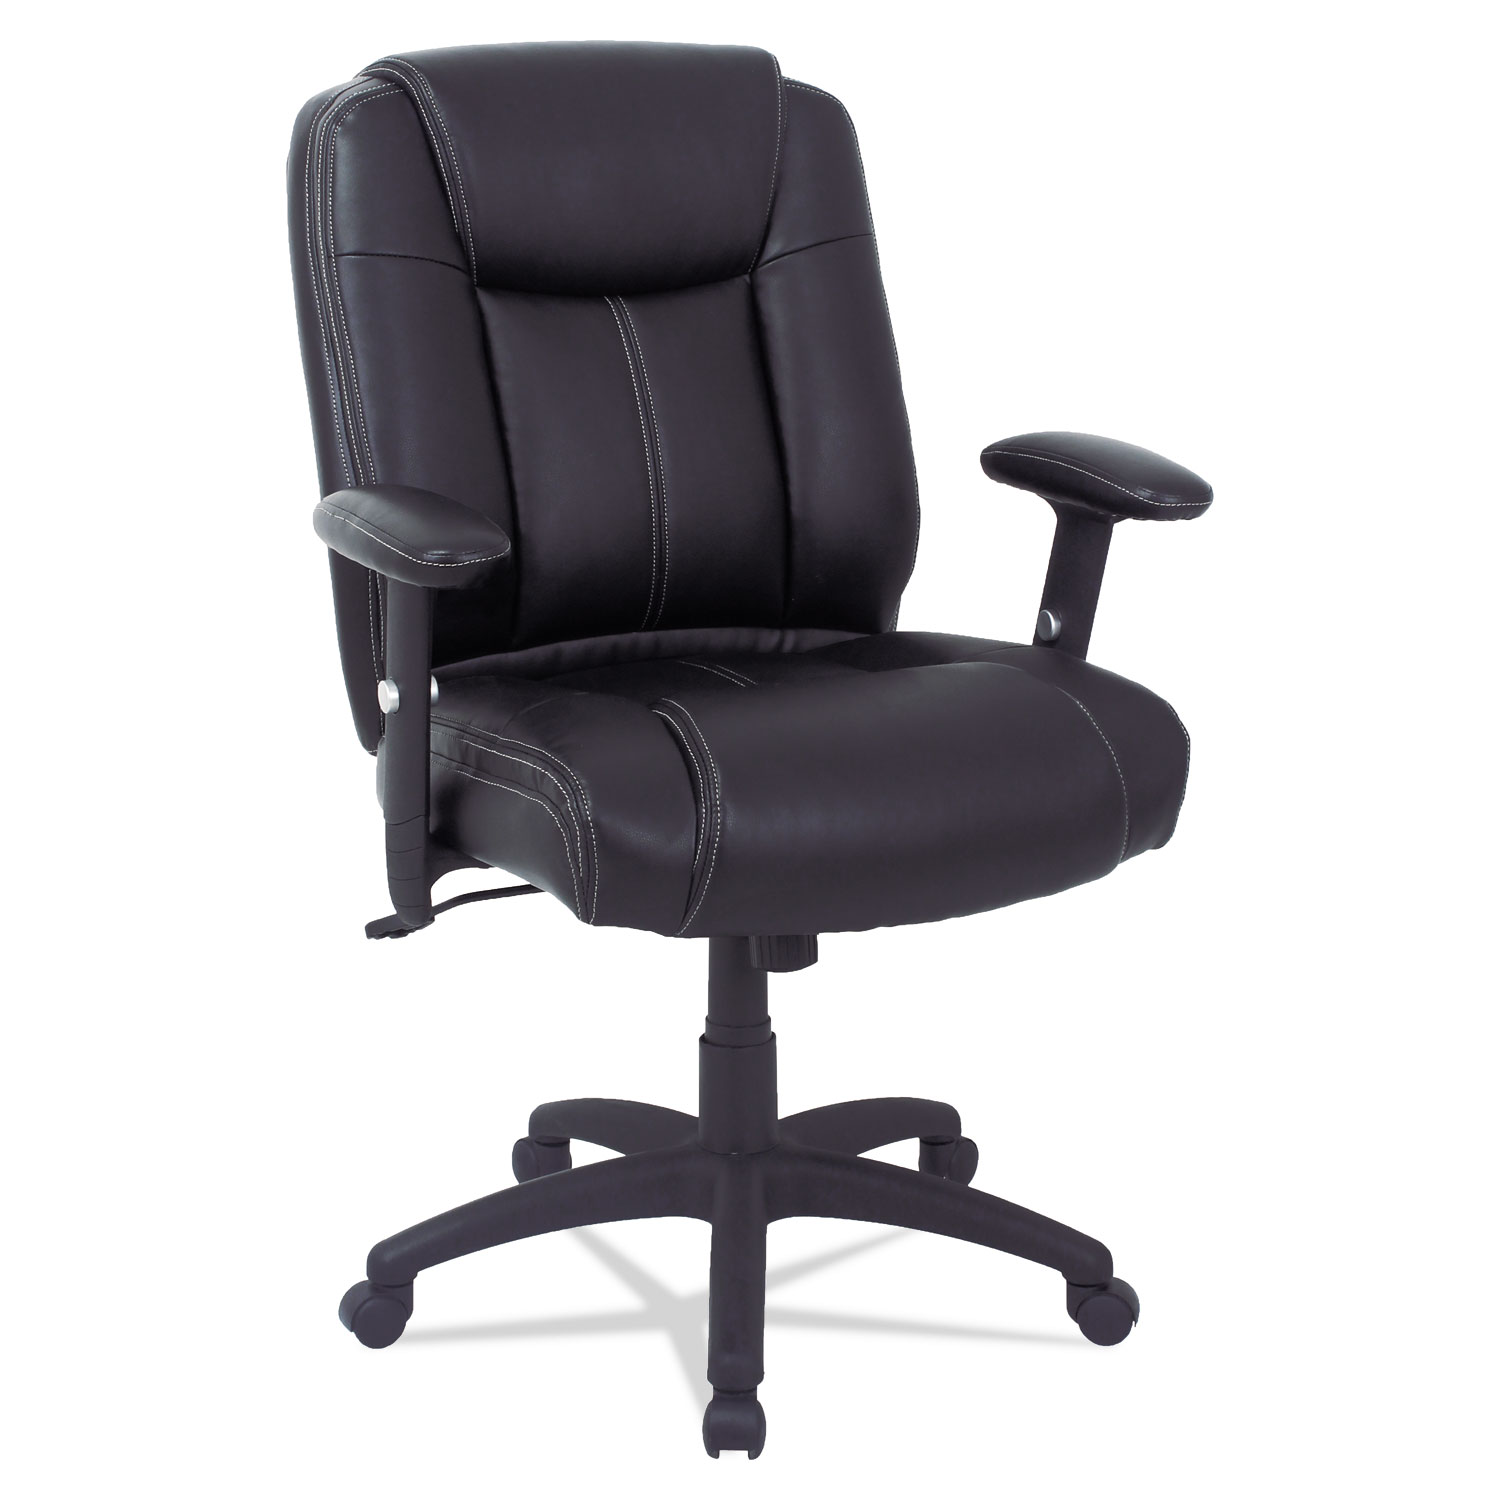  Alera ALECC4219 Alera CC Series Executive Mid-Back Leather Chair with Adjustable Arms, Supports up to 275 lbs., Black Seat/Back, Black Base (ALECC4219) 